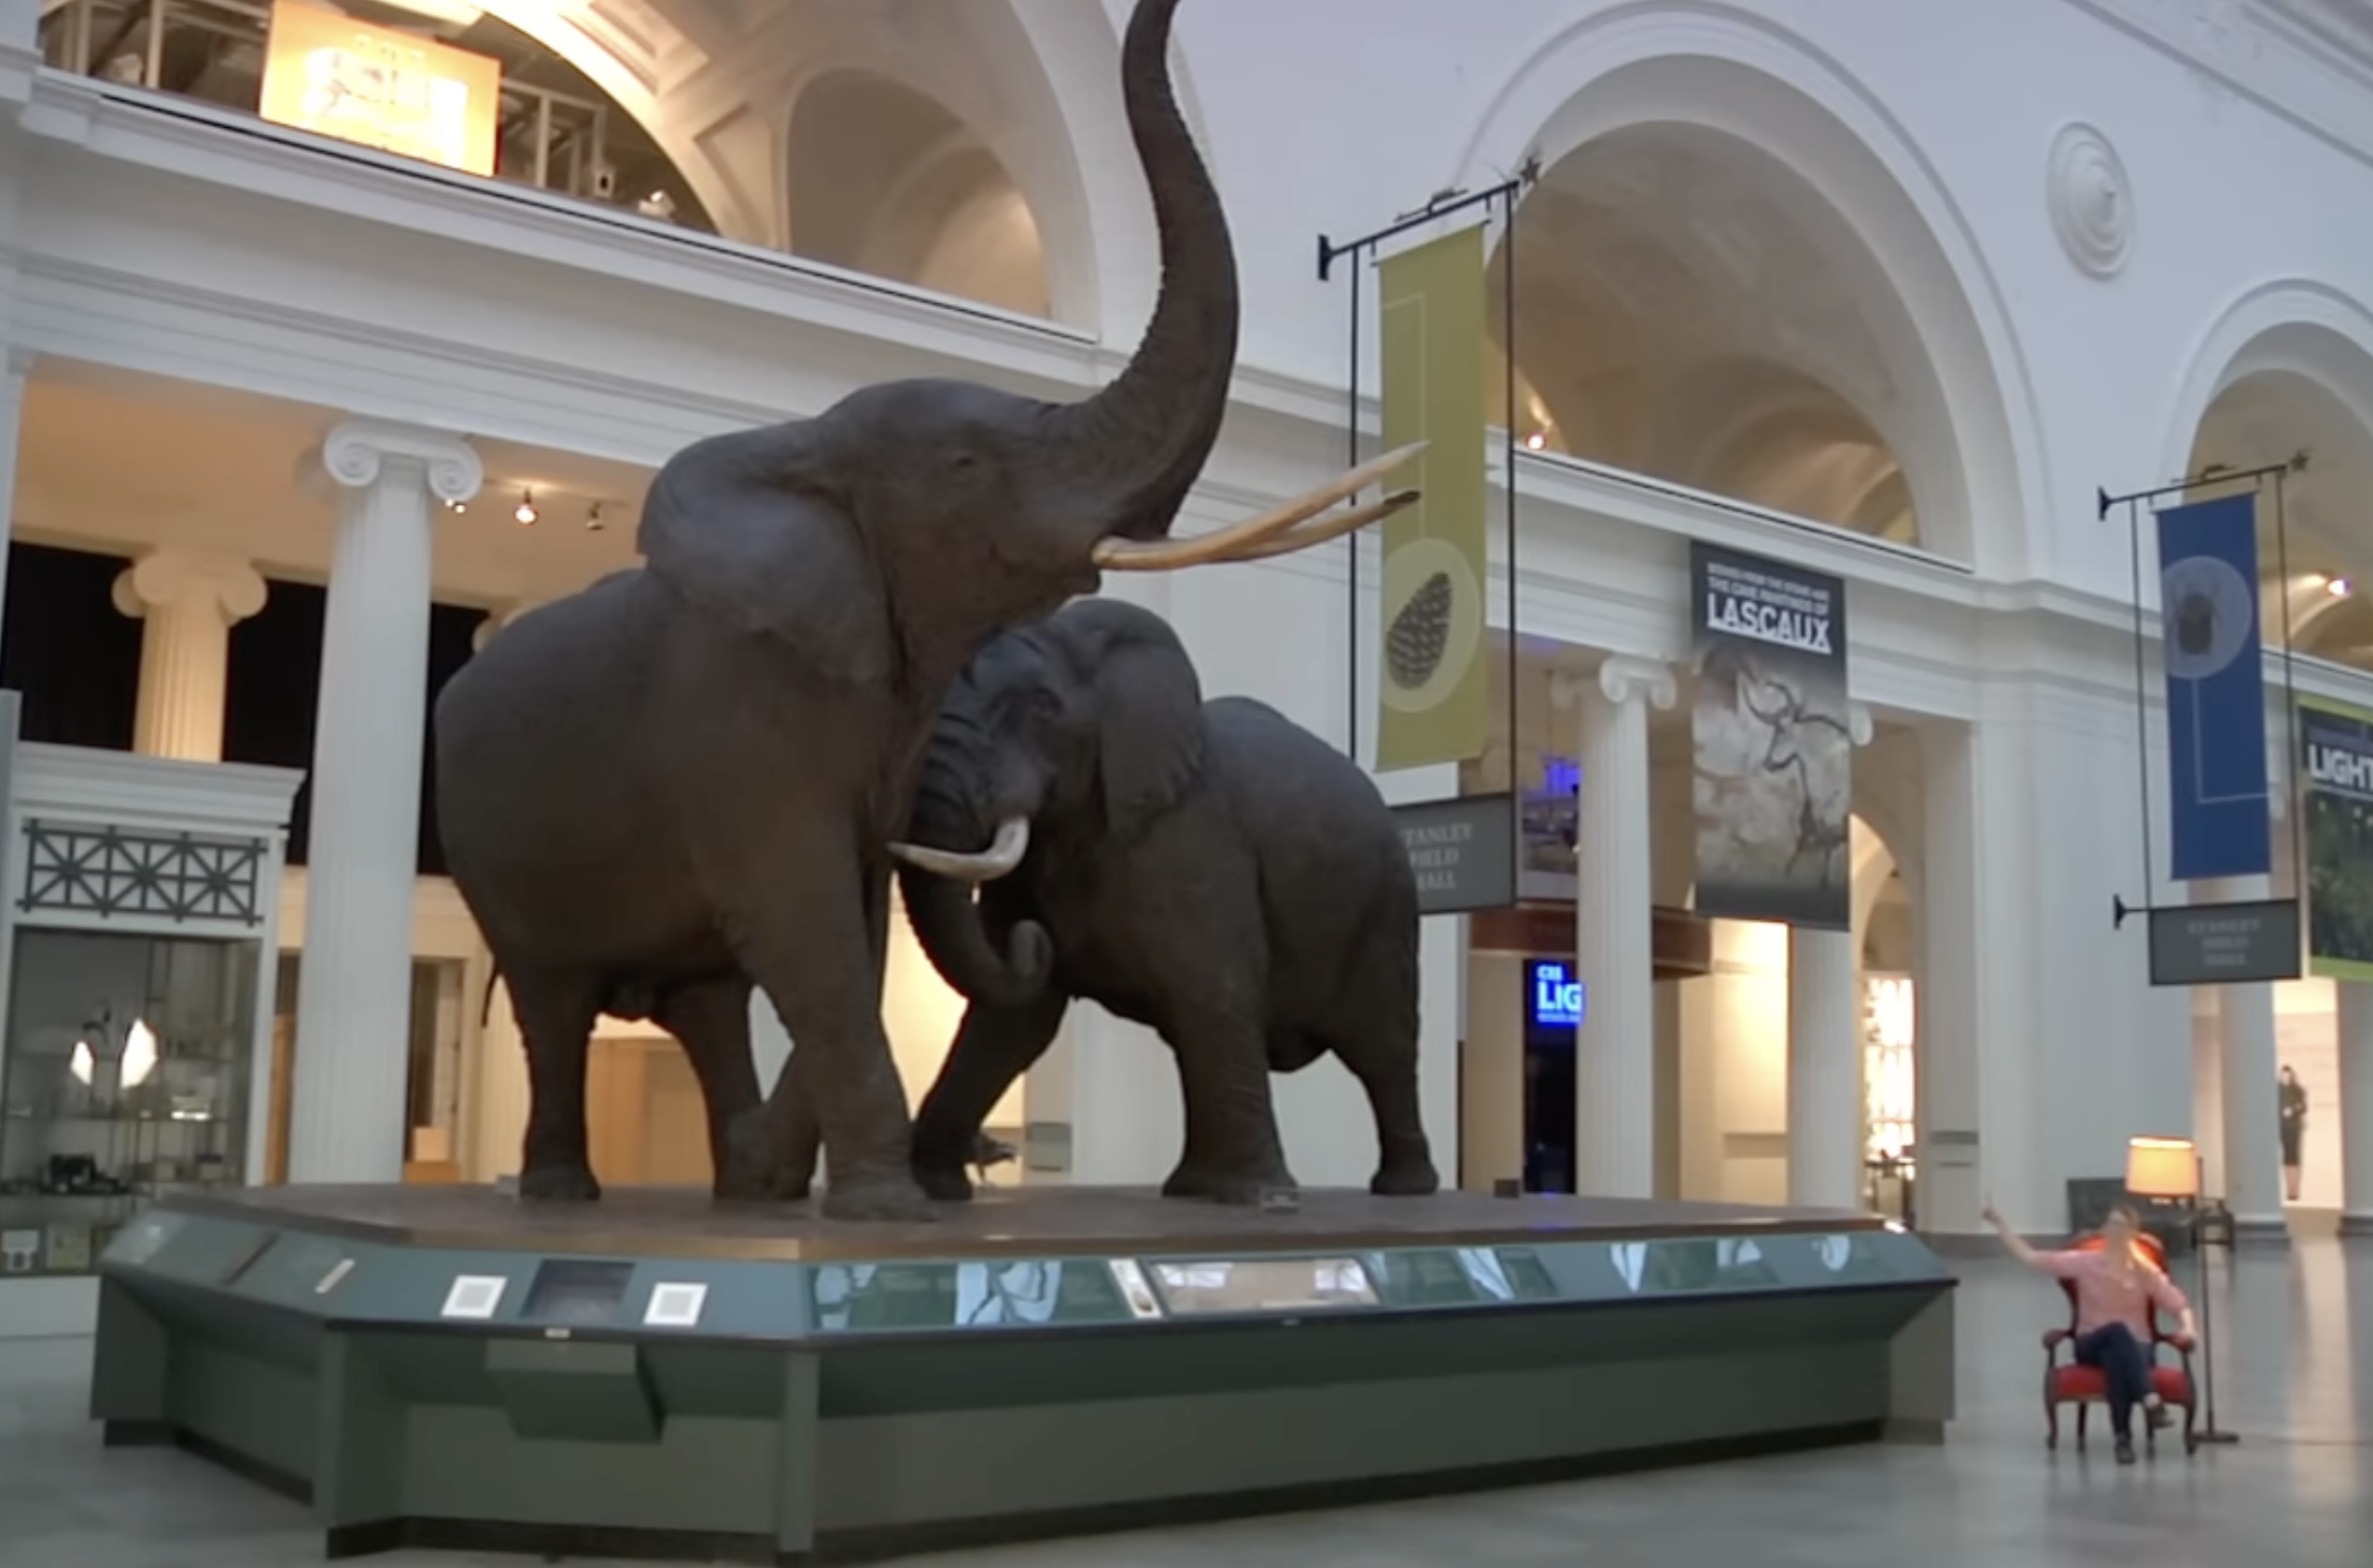 Two taxidermied elephants on a platform in a museum hall. To the right, a woman sits on a chair pointing up at the elephants.